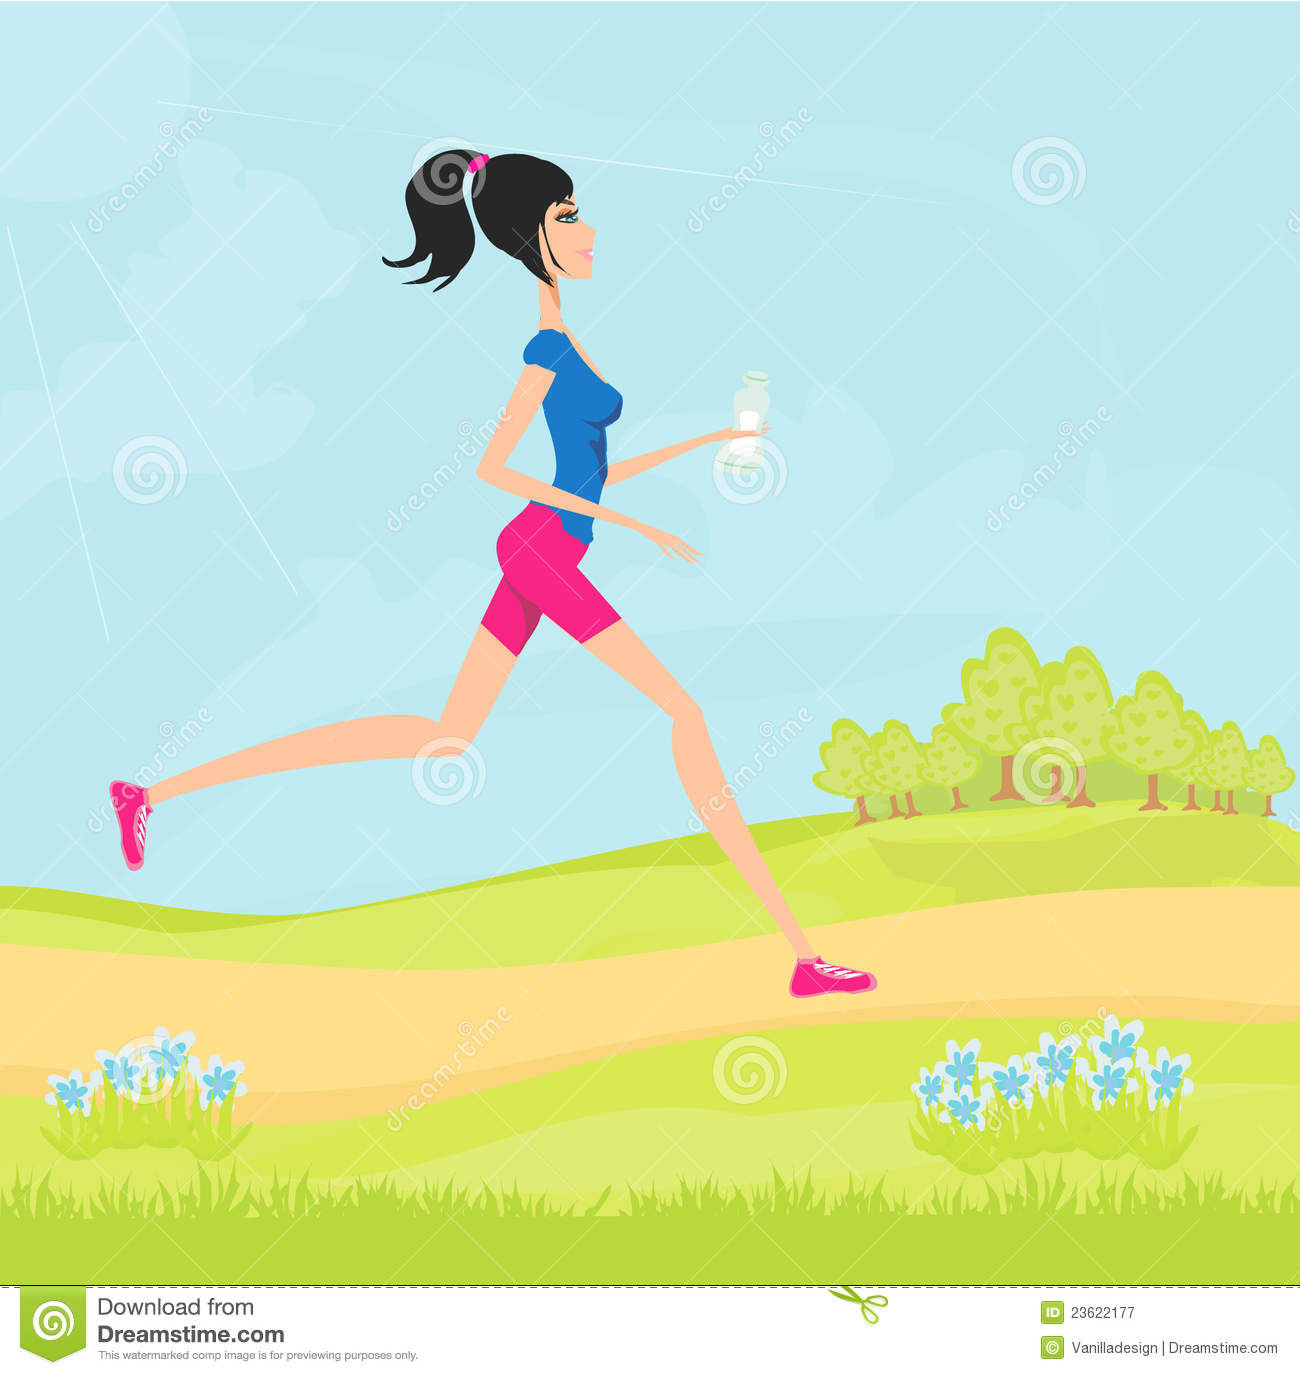 Jogging Girl In Summer Royalty Free Stock Photography   Image